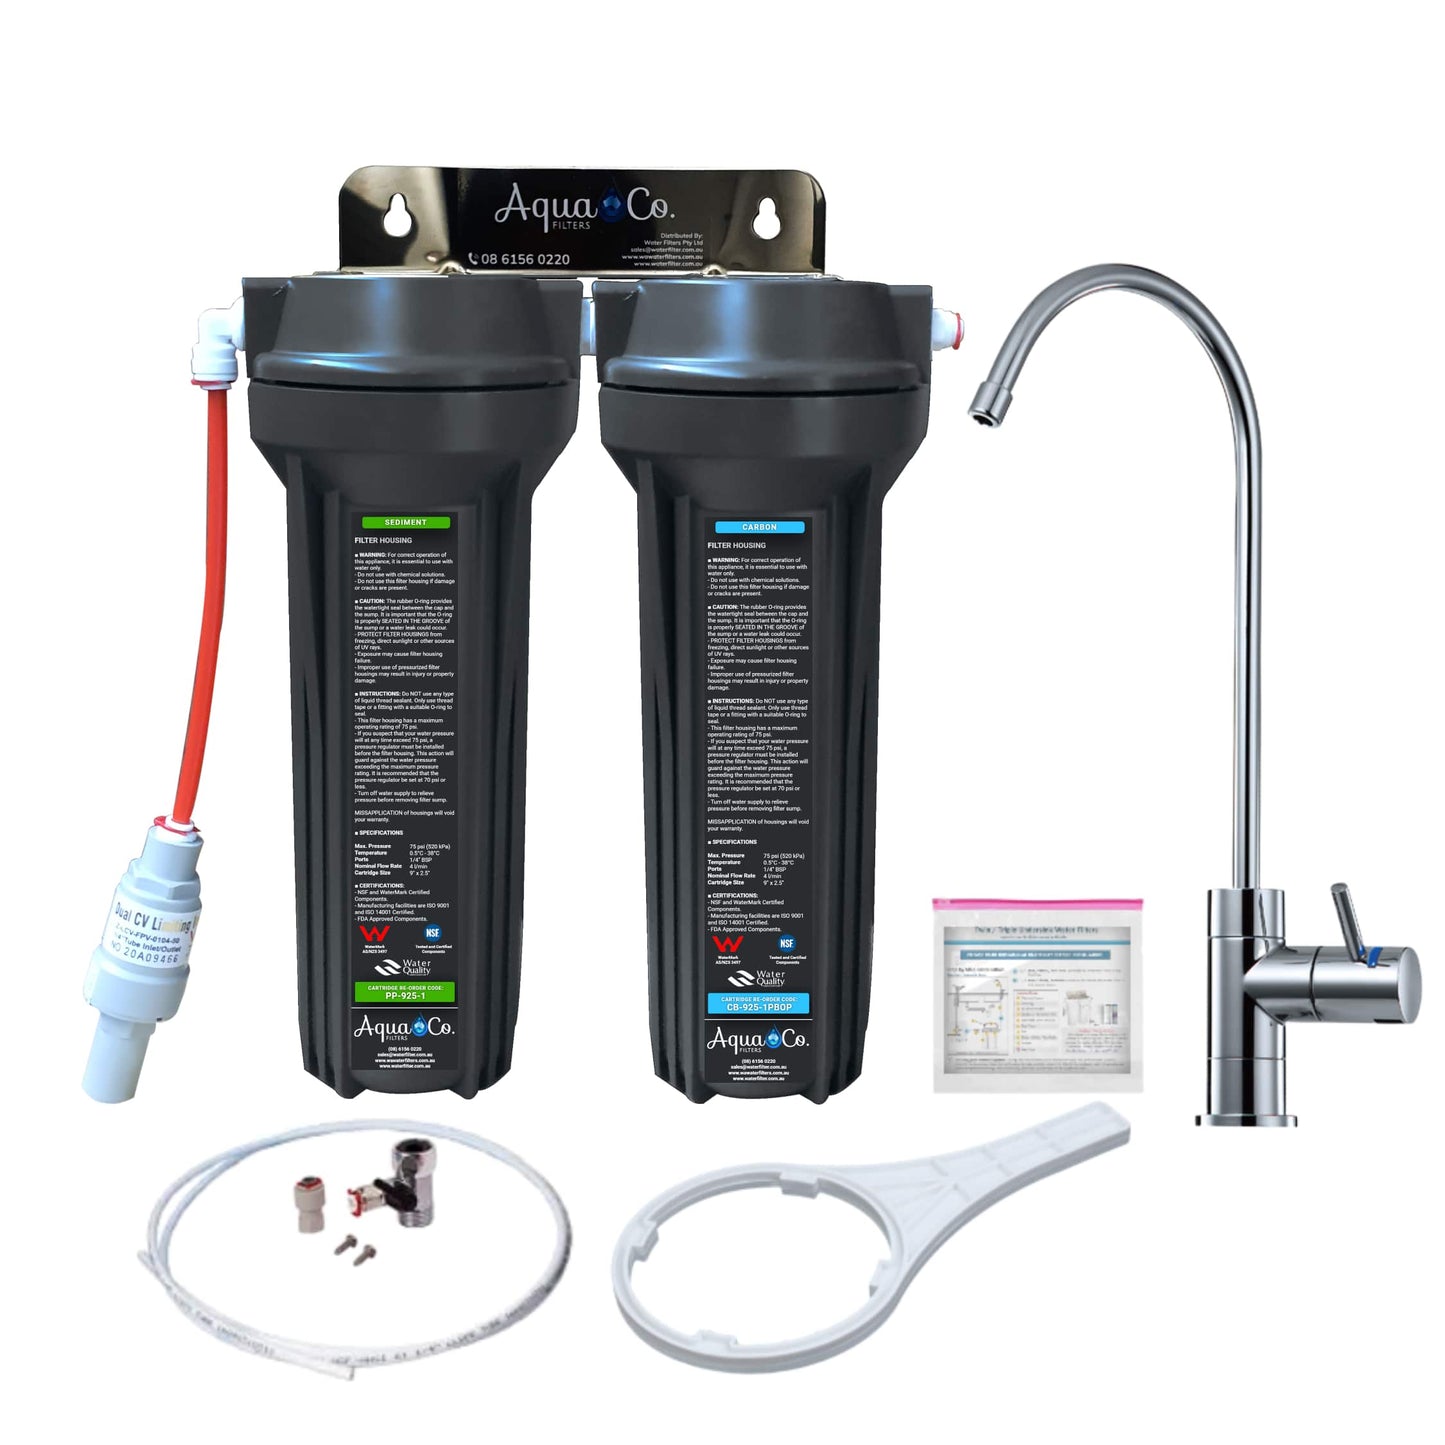 AquaCo SYS-925SC Undersink Water Filter - Reduces Chlorine, Taste, Odours, Parasites, and Lead.